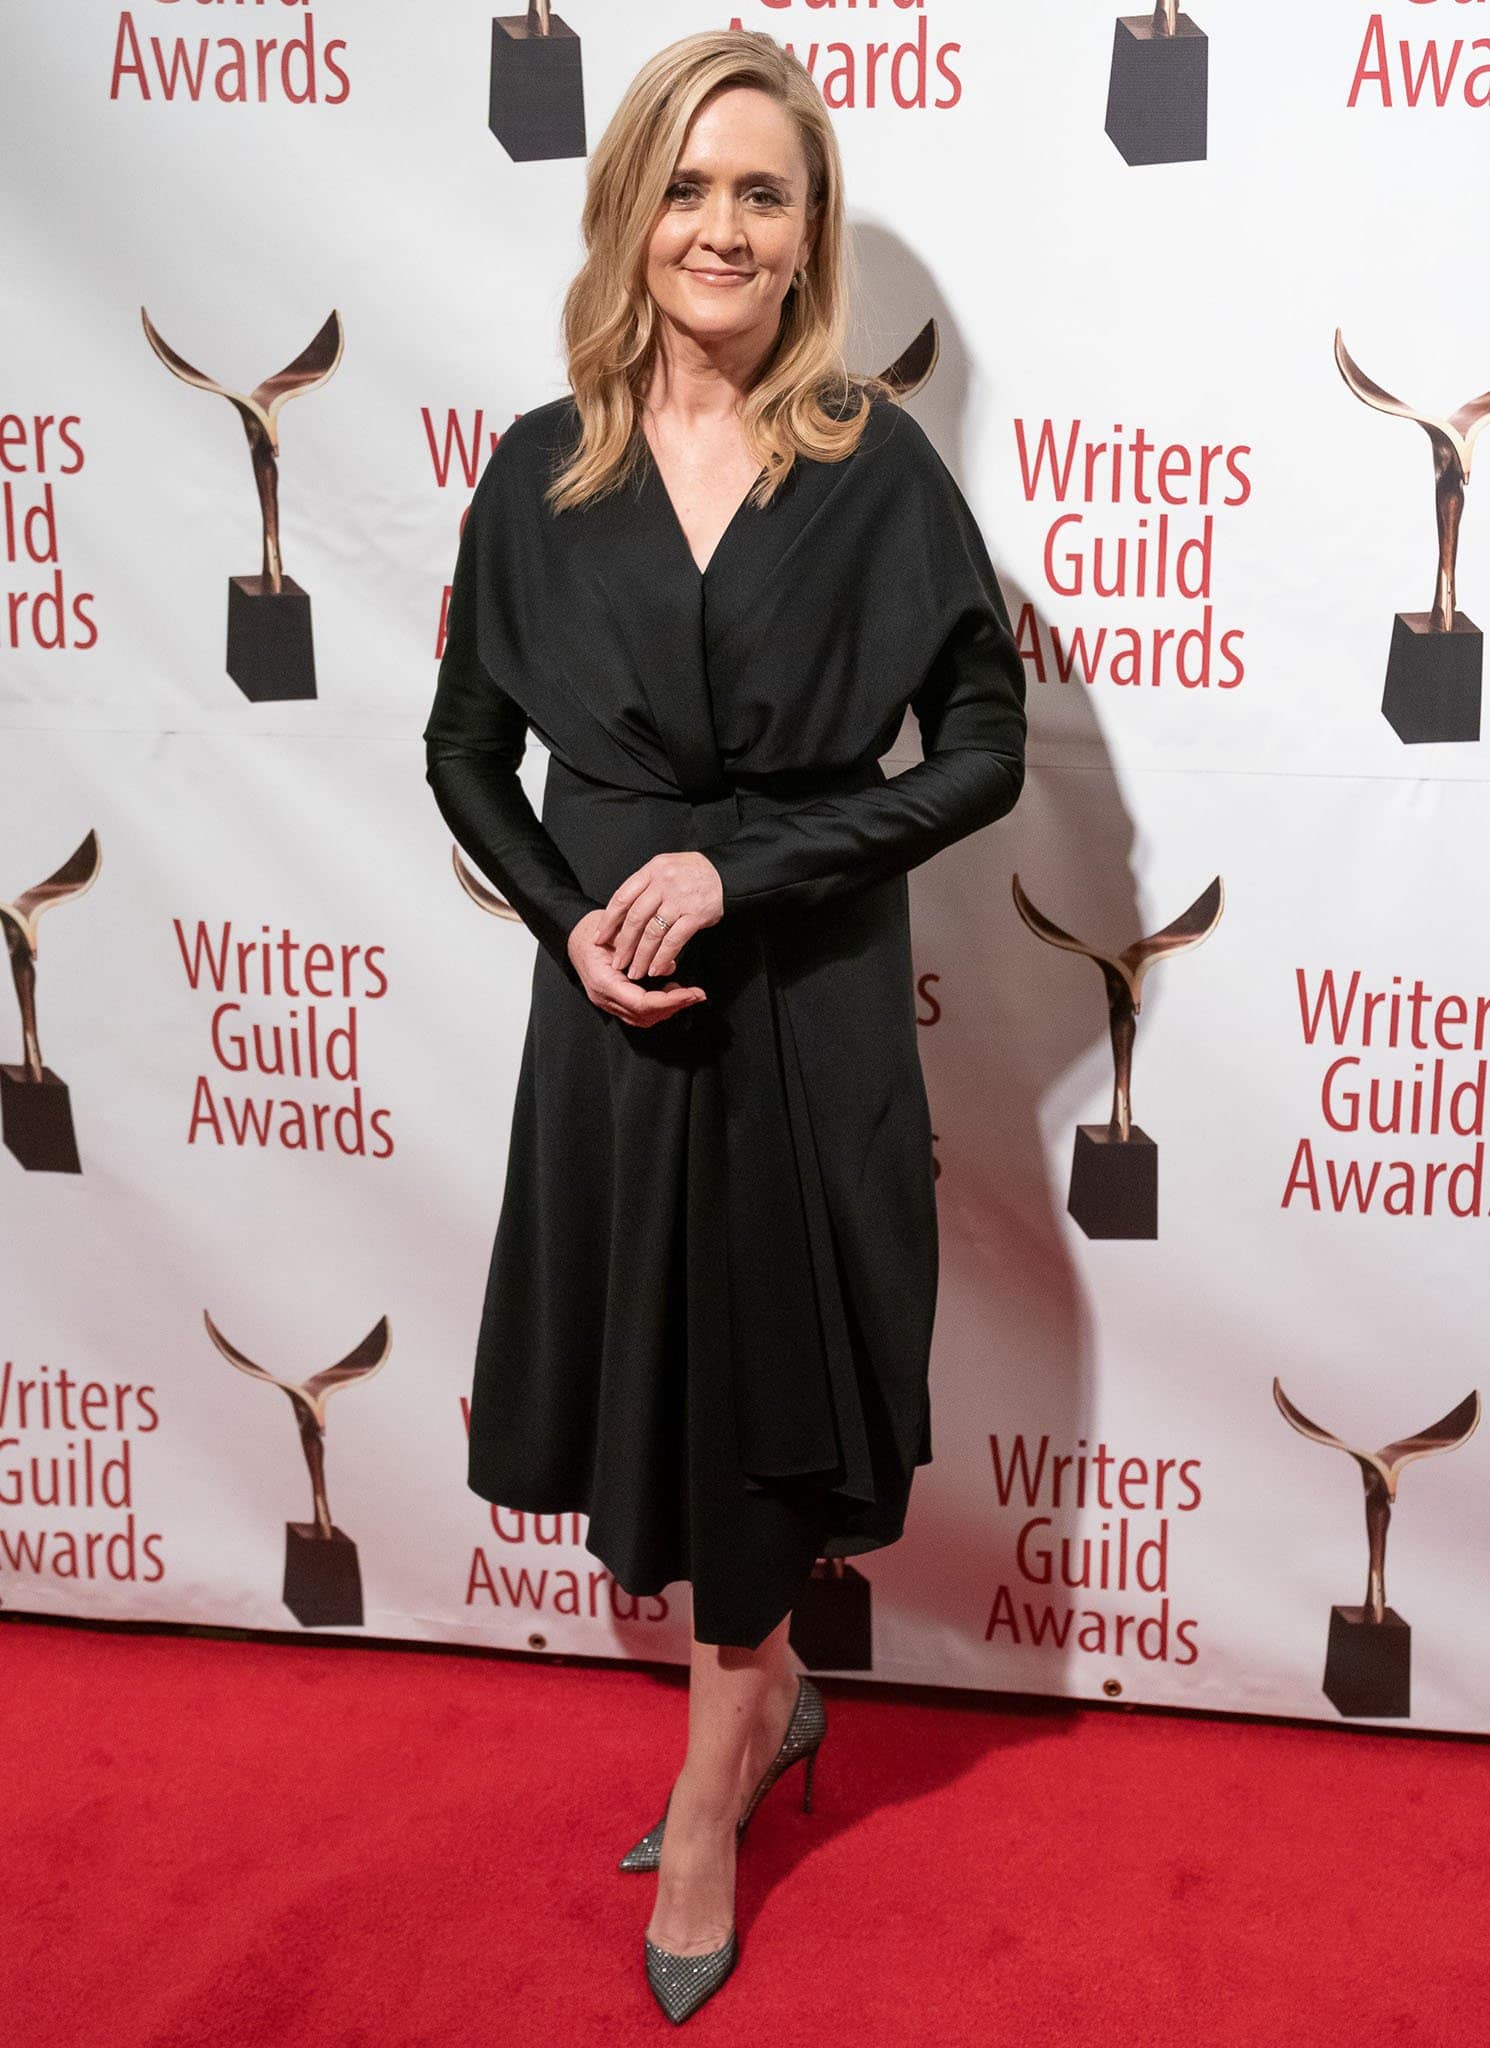 Samantha Bee, a talk show host and comedienne, kickstarted her career as a correspondent on The Daily Show with Jon Stewart, and her continued success has led to a notable net worth of approximately $8 million